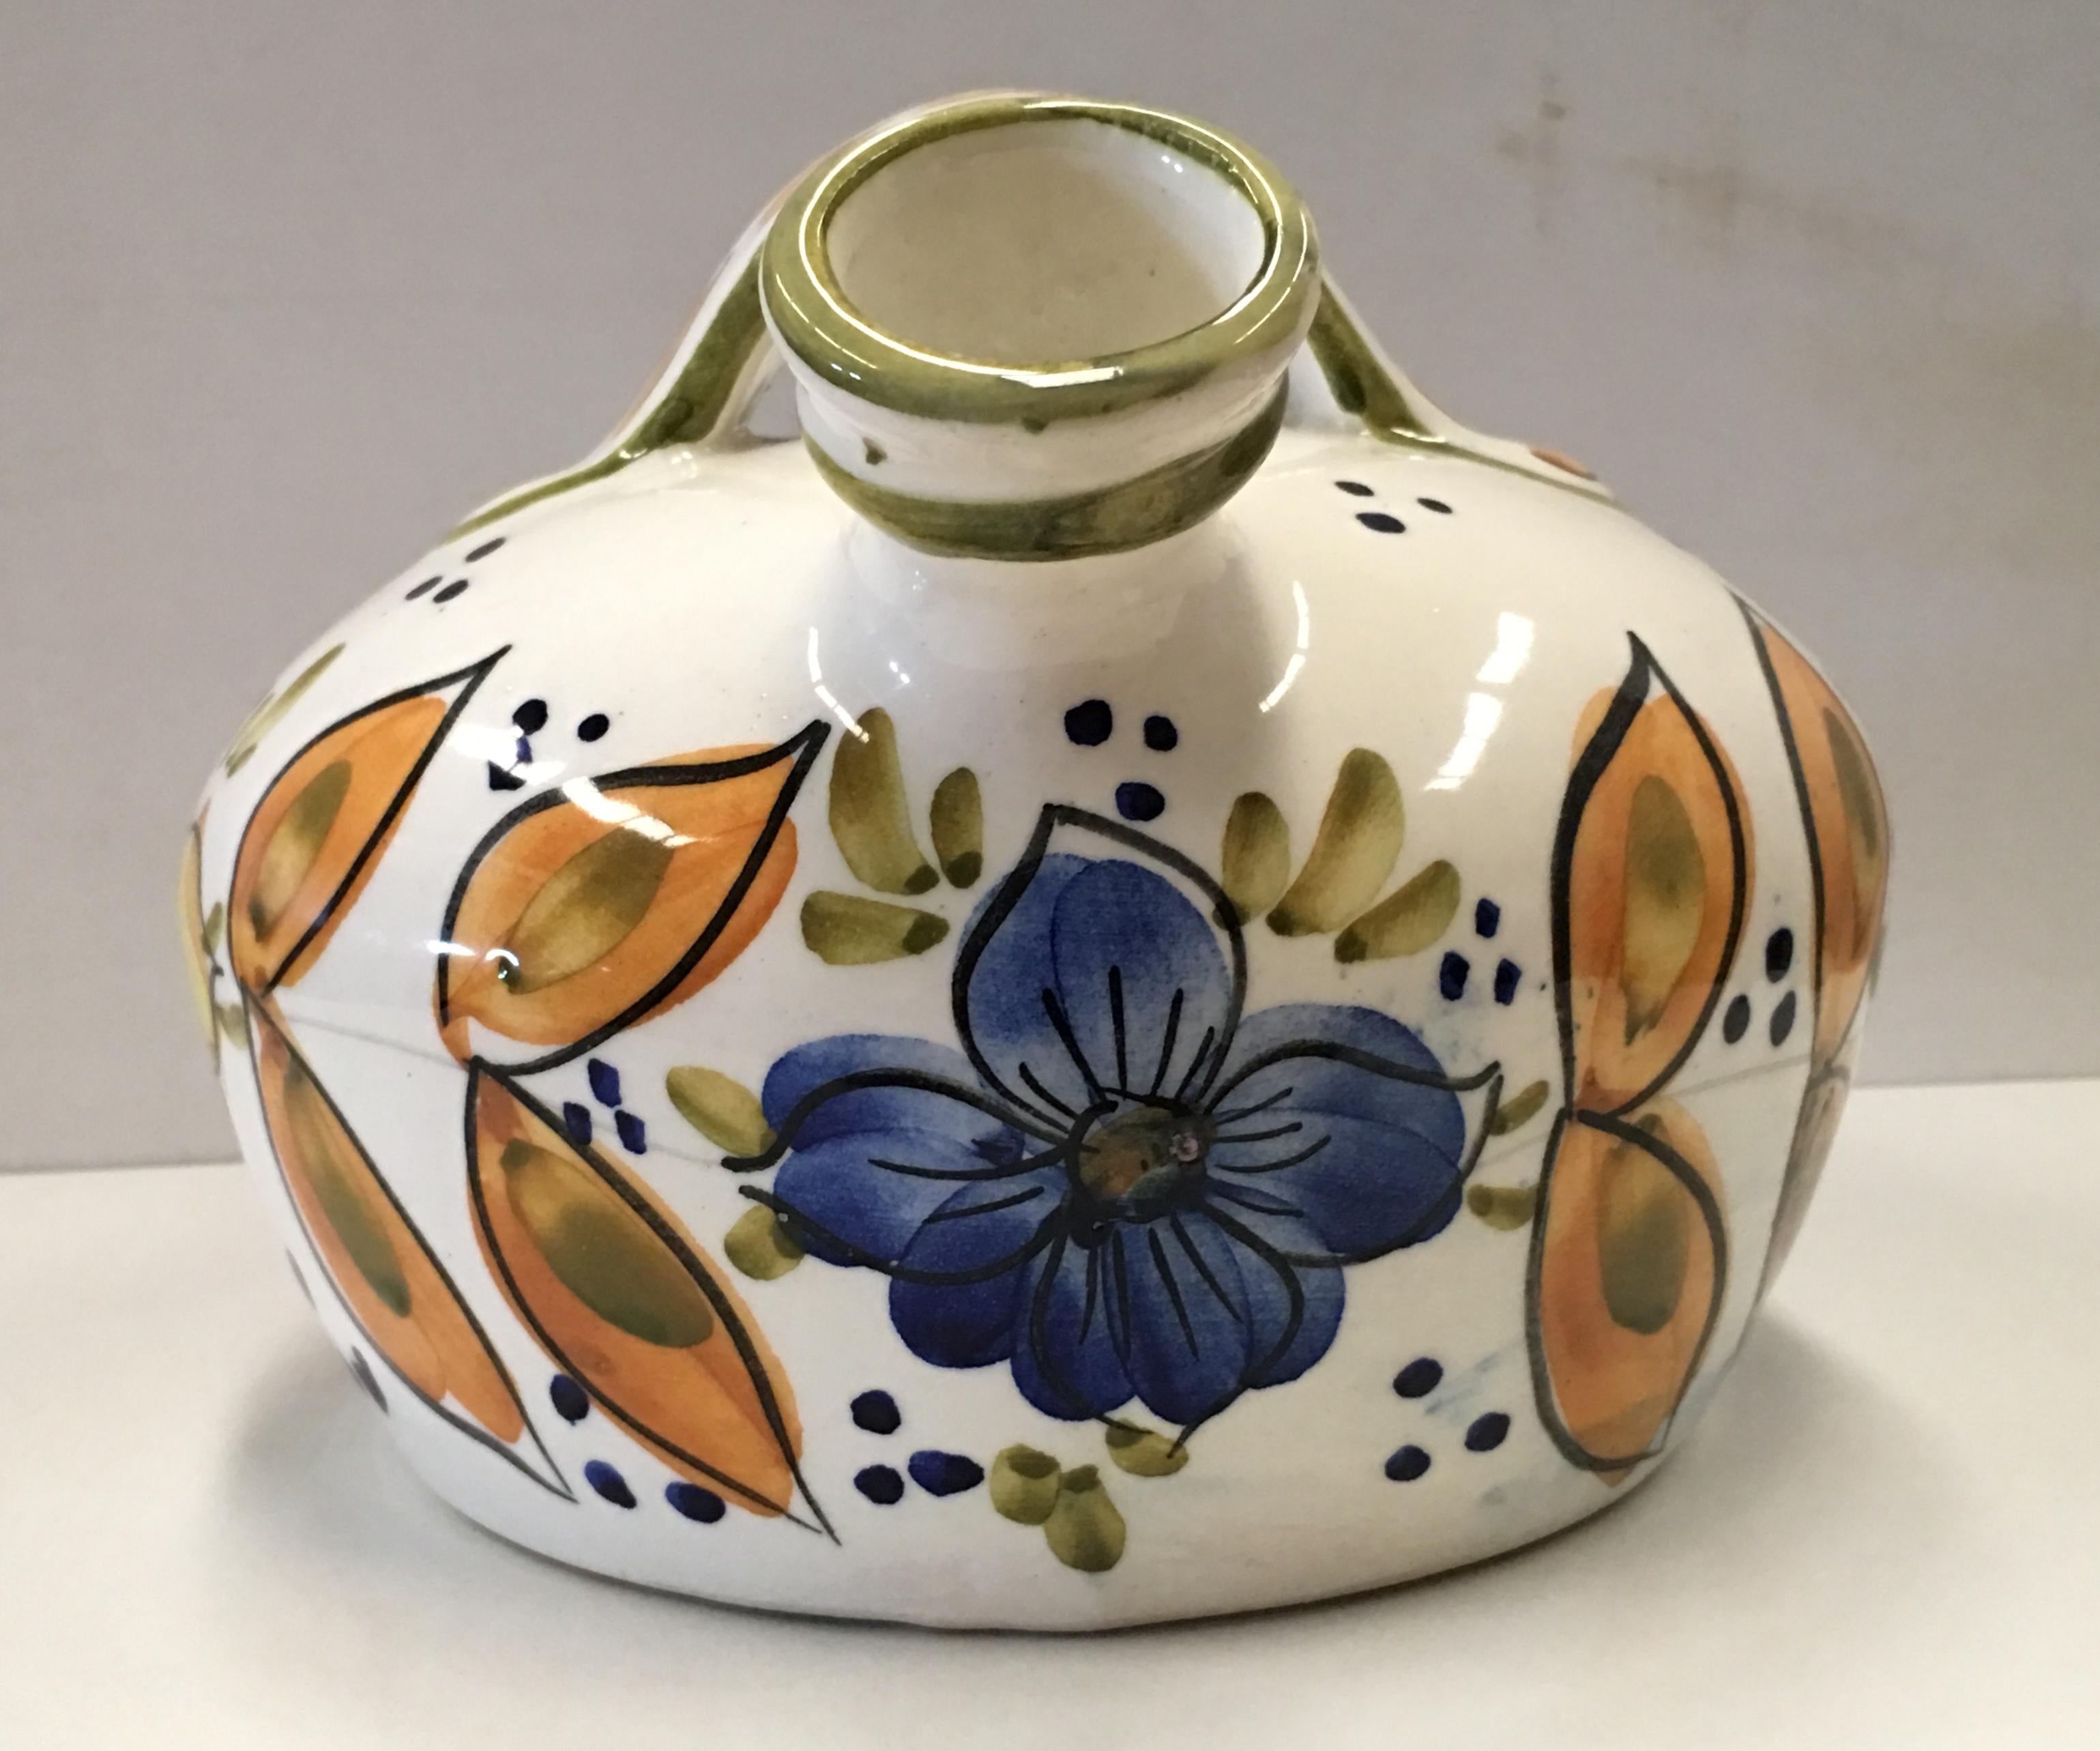 20th century Spanish glazed cruche or pitcher
The purpose of storing water in an earthenware pitcher is to keep the water cool.